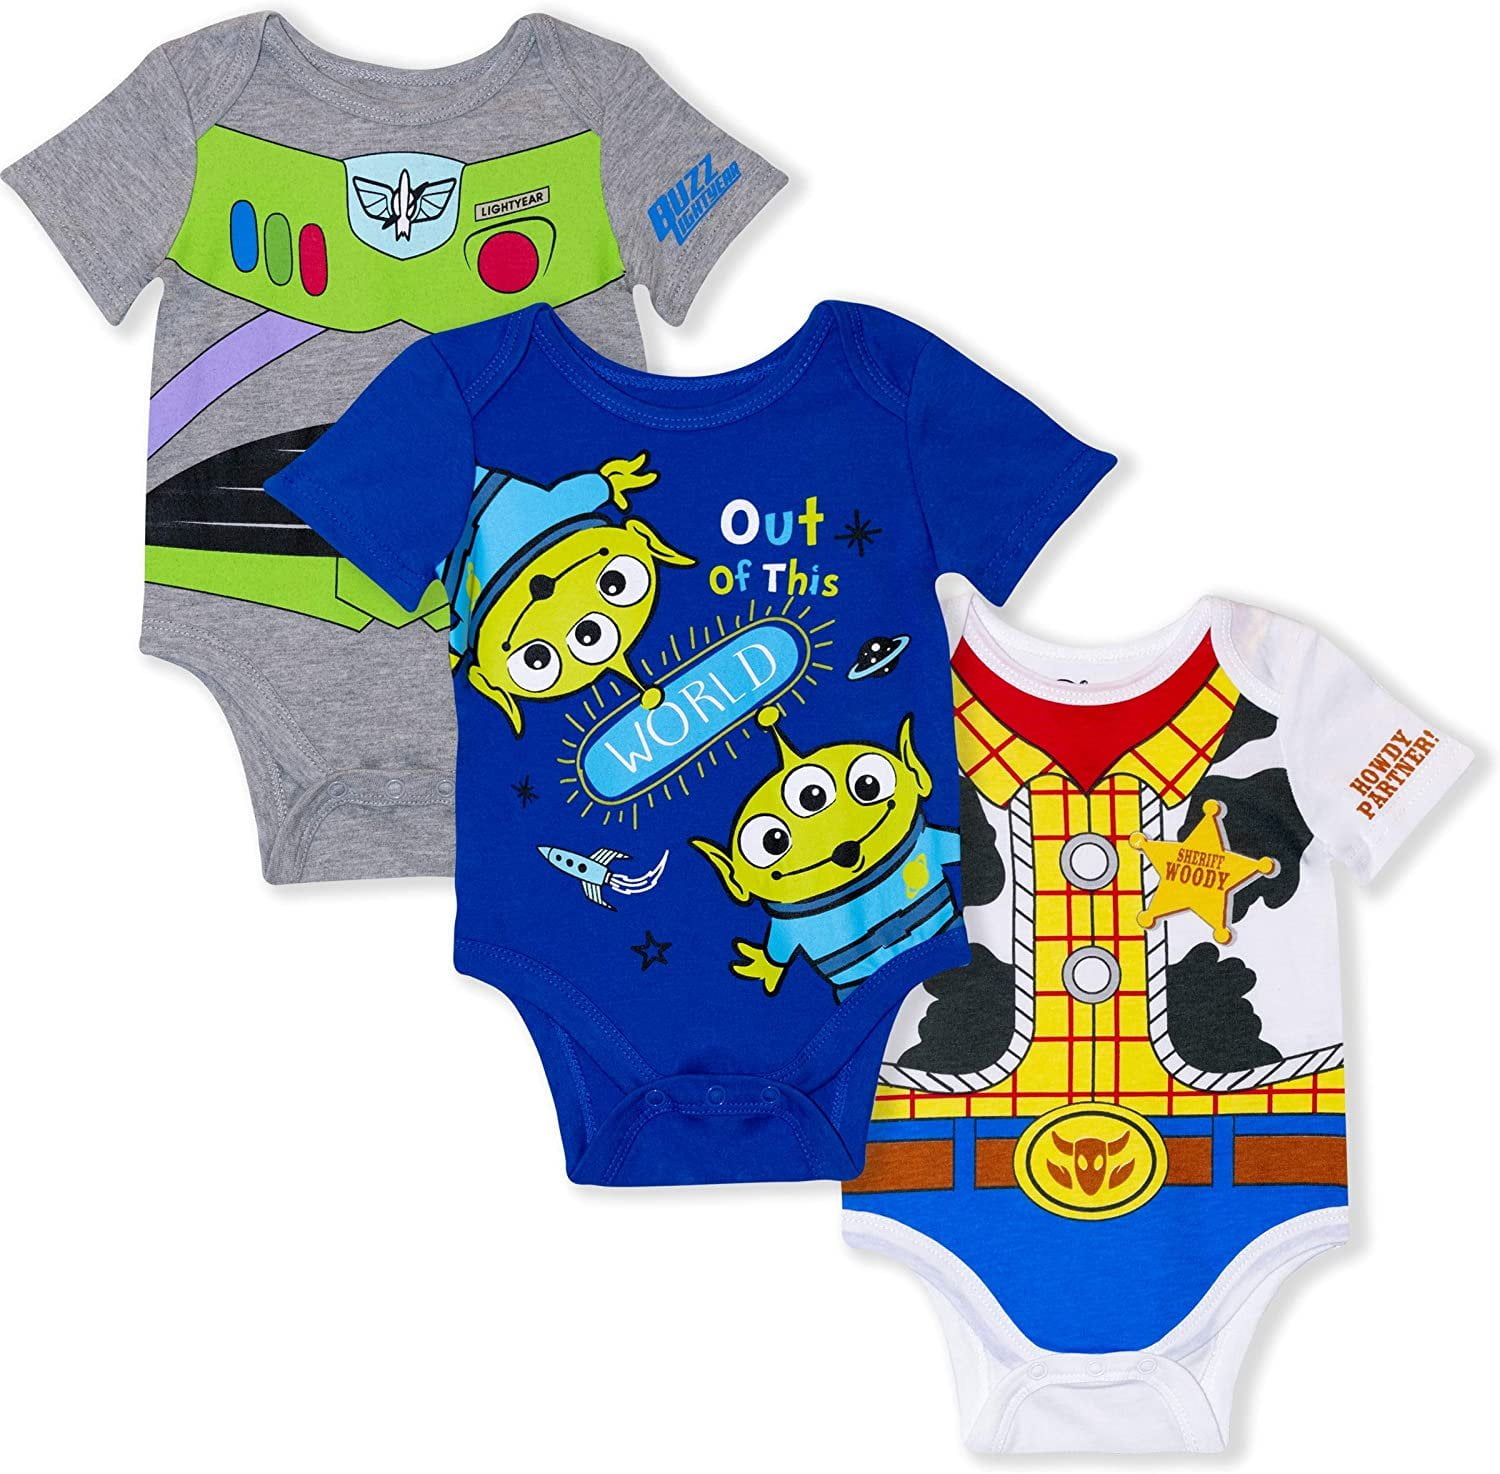 ALIEN TOY STORY Personalised Baby Vest Disney Baby Bodysuit Romper Toy Story Alien Birthday Outfit Personalized Baby Vest Sleepsuit